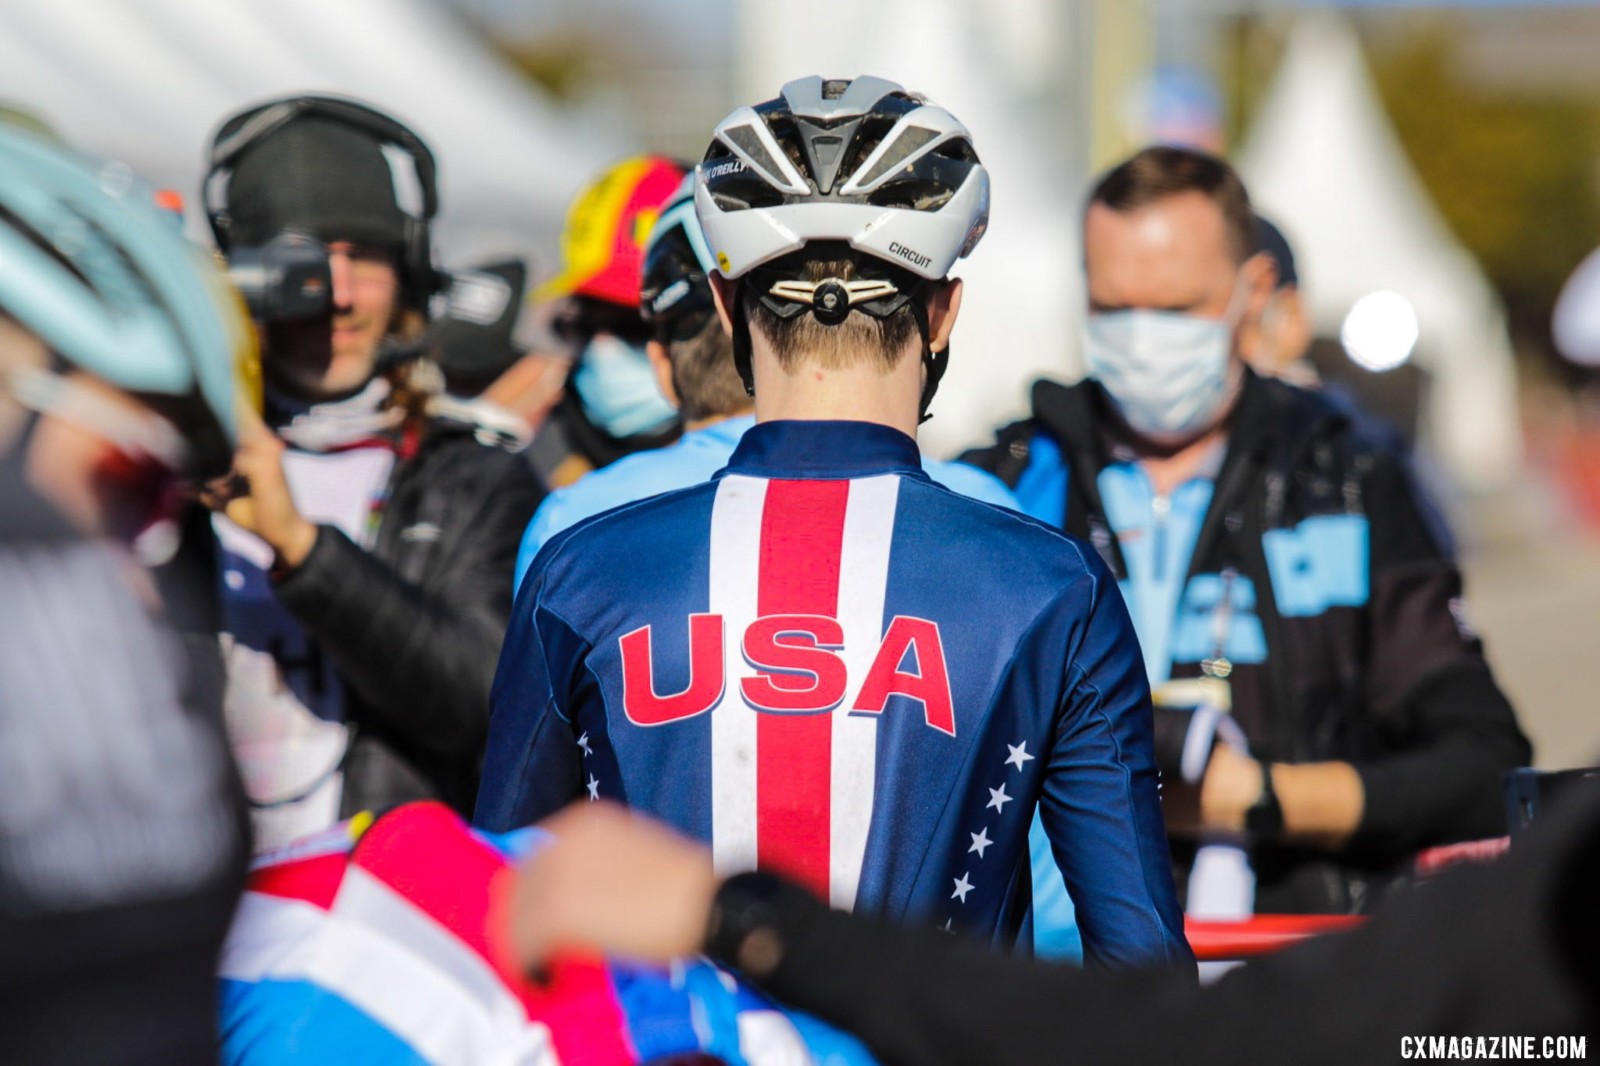 Team USA had a good showing capped by Andrew August's fifth place. Junior Men. 2022 Cyclocross World Championships, Fayetteville, Arkansas USA. © D. Mable / Cyclocross Magazine